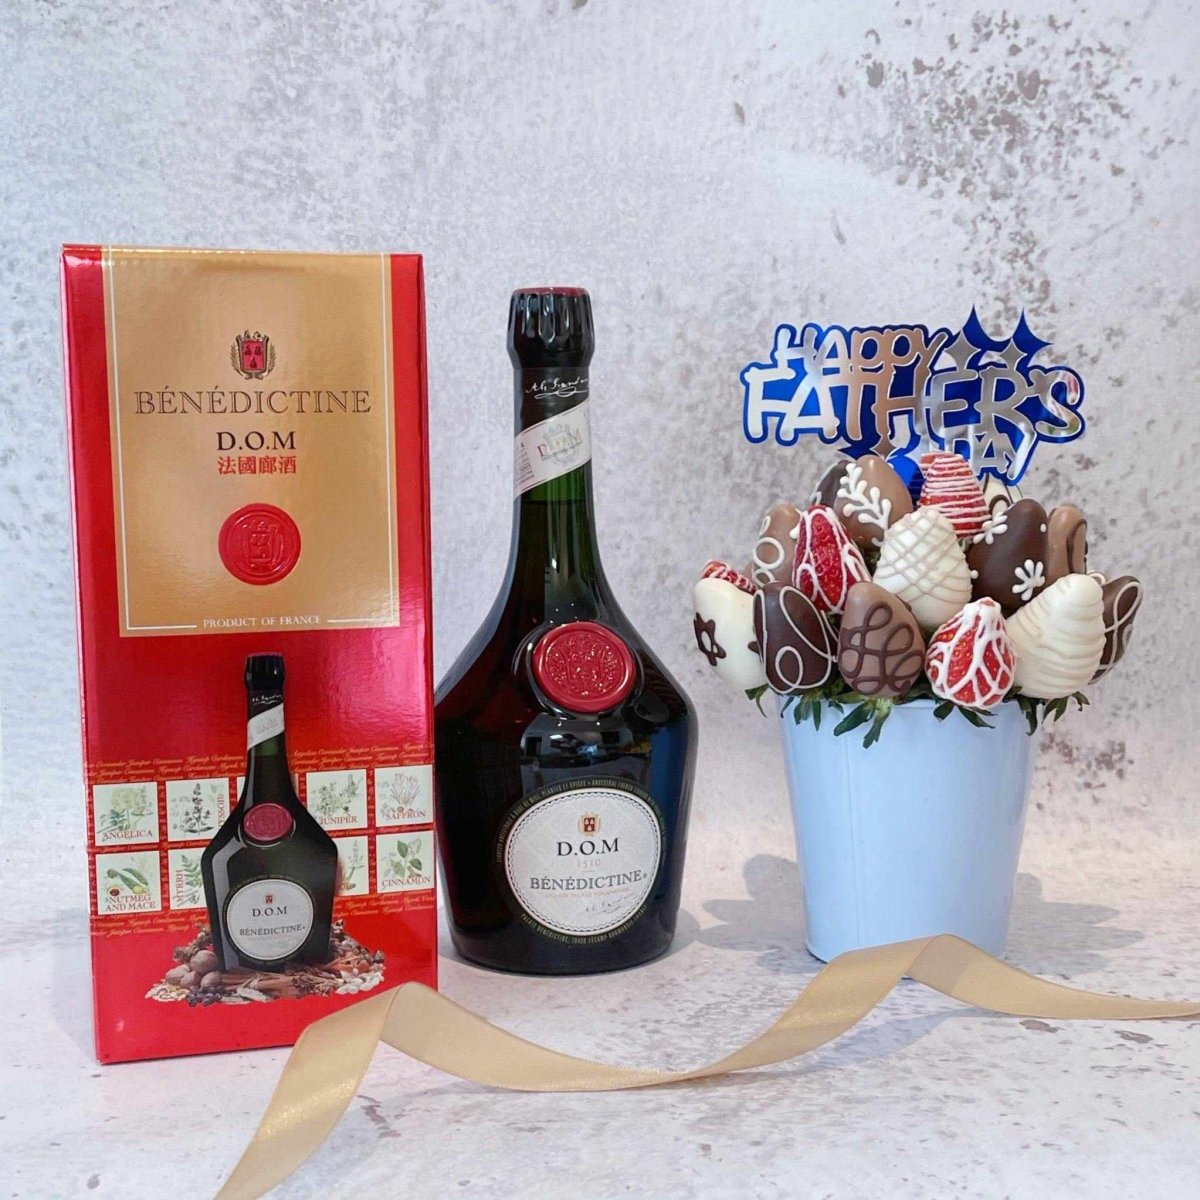 Father's Day Bundle Deal - D.O.M & All About You - Fresh Chocolate Dipped Strawberry Fruit Bouquet Arrangement Pot - Rainbowly Fresh Fruit Gift and Flower Arrangments